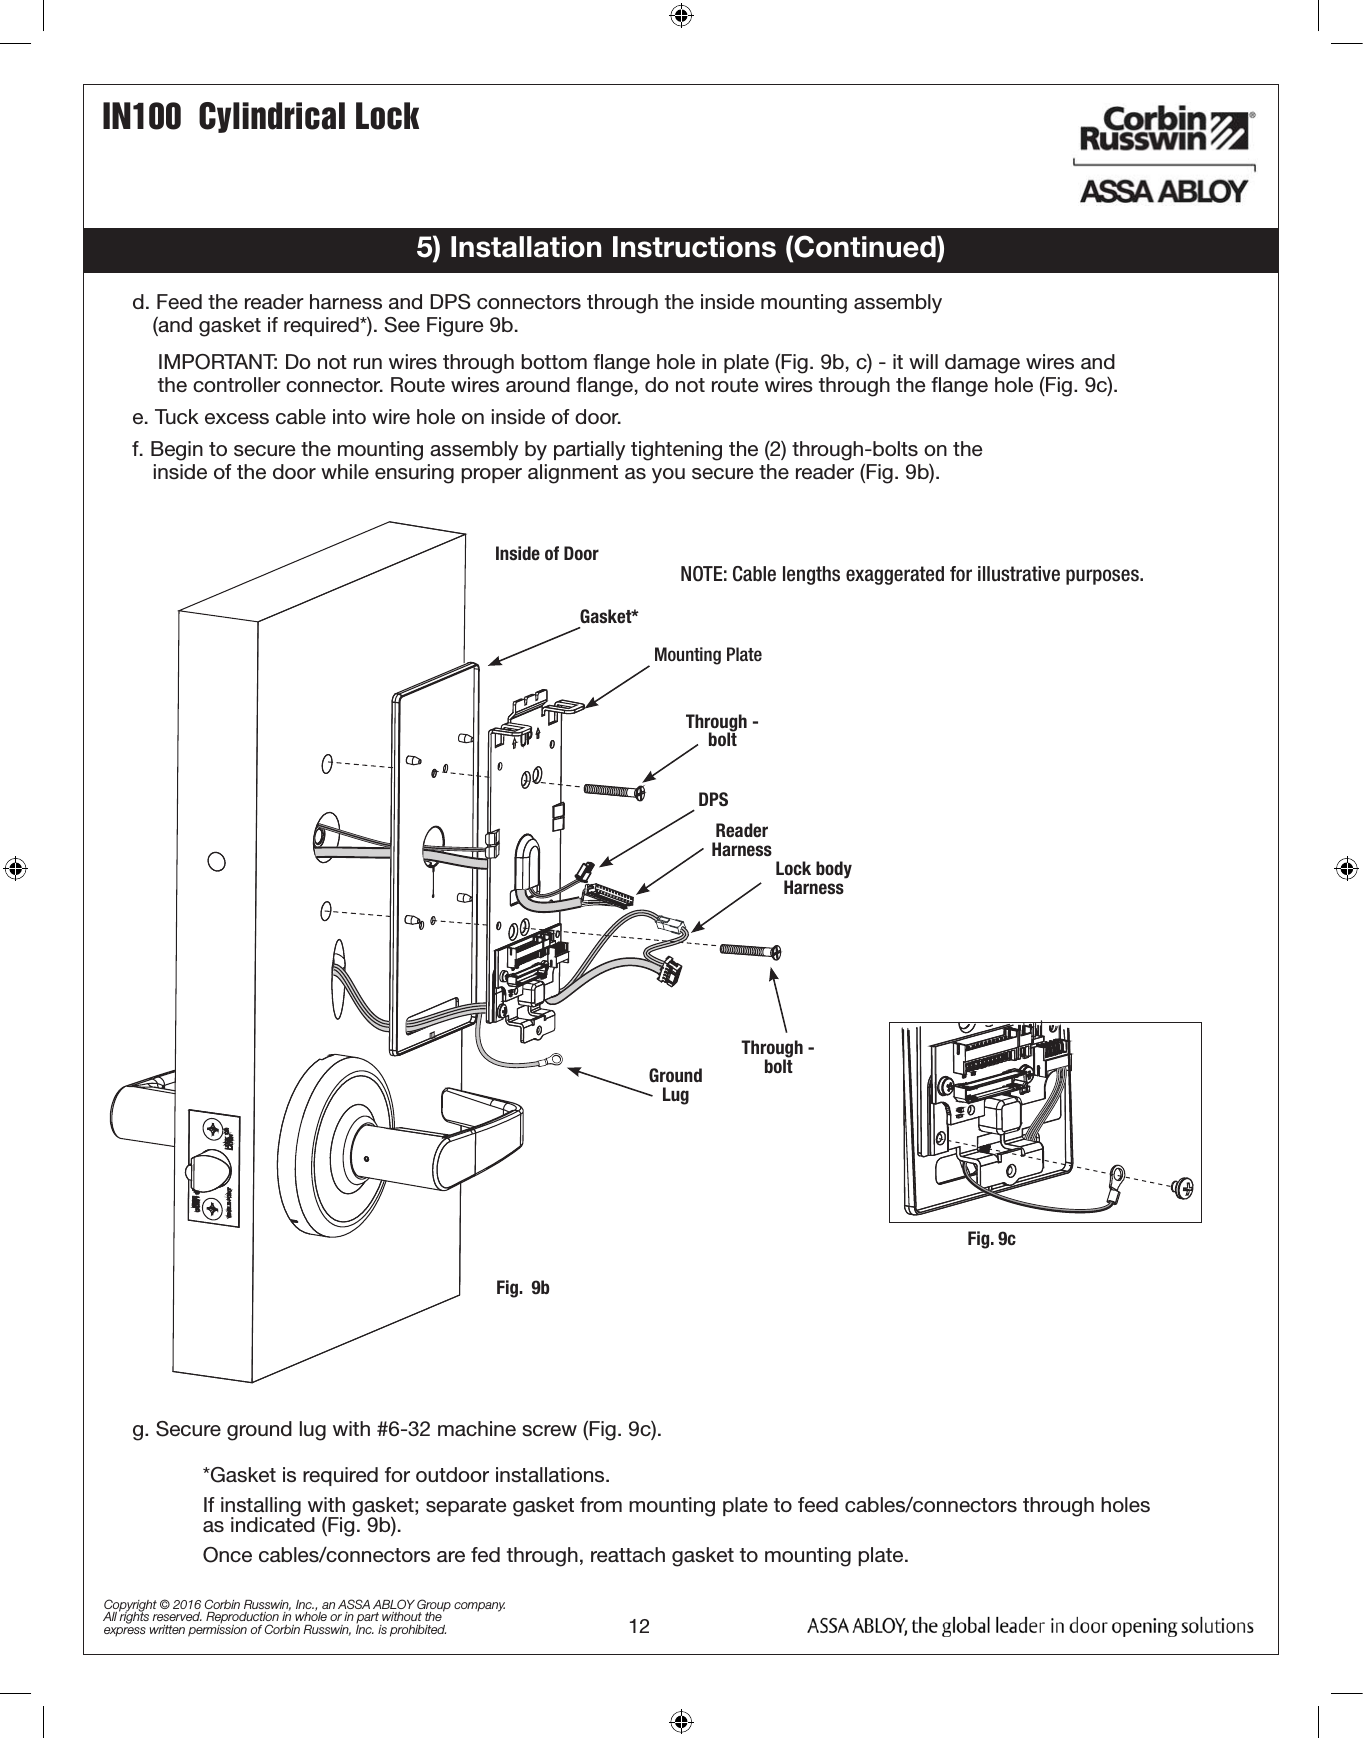 12IN100  Cylindrical LockCopyright © 2016 Corbin Russwin, Inc., an ASSA ABLOY Group company. All rights reserved. Reproduction in whole or in part without the express written permission of Corbin Russwin, Inc. is prohibited.e. Tuck excess cable into wire hole on inside of door.f. Begin to secure the mounting assembly by partially tightening the (2) through-bolts on the            inside of the door while ensuring proper alignment as you secure the reader (Fig. 9b).d. Feed the reader harness and DPS connectors through the inside mounting assembly                                              (and gasket if required*). See Figure 9b.IMPORTANT: Do not run wires through bottom ﬂange hole in plate (Fig. 9b, c) - it will damage wires and the controller connector. Route wires around ﬂange, do not route wires through the ﬂange hole (Fig. 9c).5) Installation Instructions (Continued)Fig.  9bGasket*Mounting PlateLock body HarnessGround LugDPSReader HarnessNOTE: Cable lengths exaggerated for illustrative purposes.Inside of DoorThrough - boltThrough - bolt*Gasket is required for outdoor installations. If installing with gasket; separate gasket from mounting plate to feed cables/connectors through holes as indicated (Fig. 9b). Once cables/connectors are fed through, reattach gasket to mounting plate.Fig. 9cg. Secure ground lug with #6-32 machine screw (Fig. 9c).